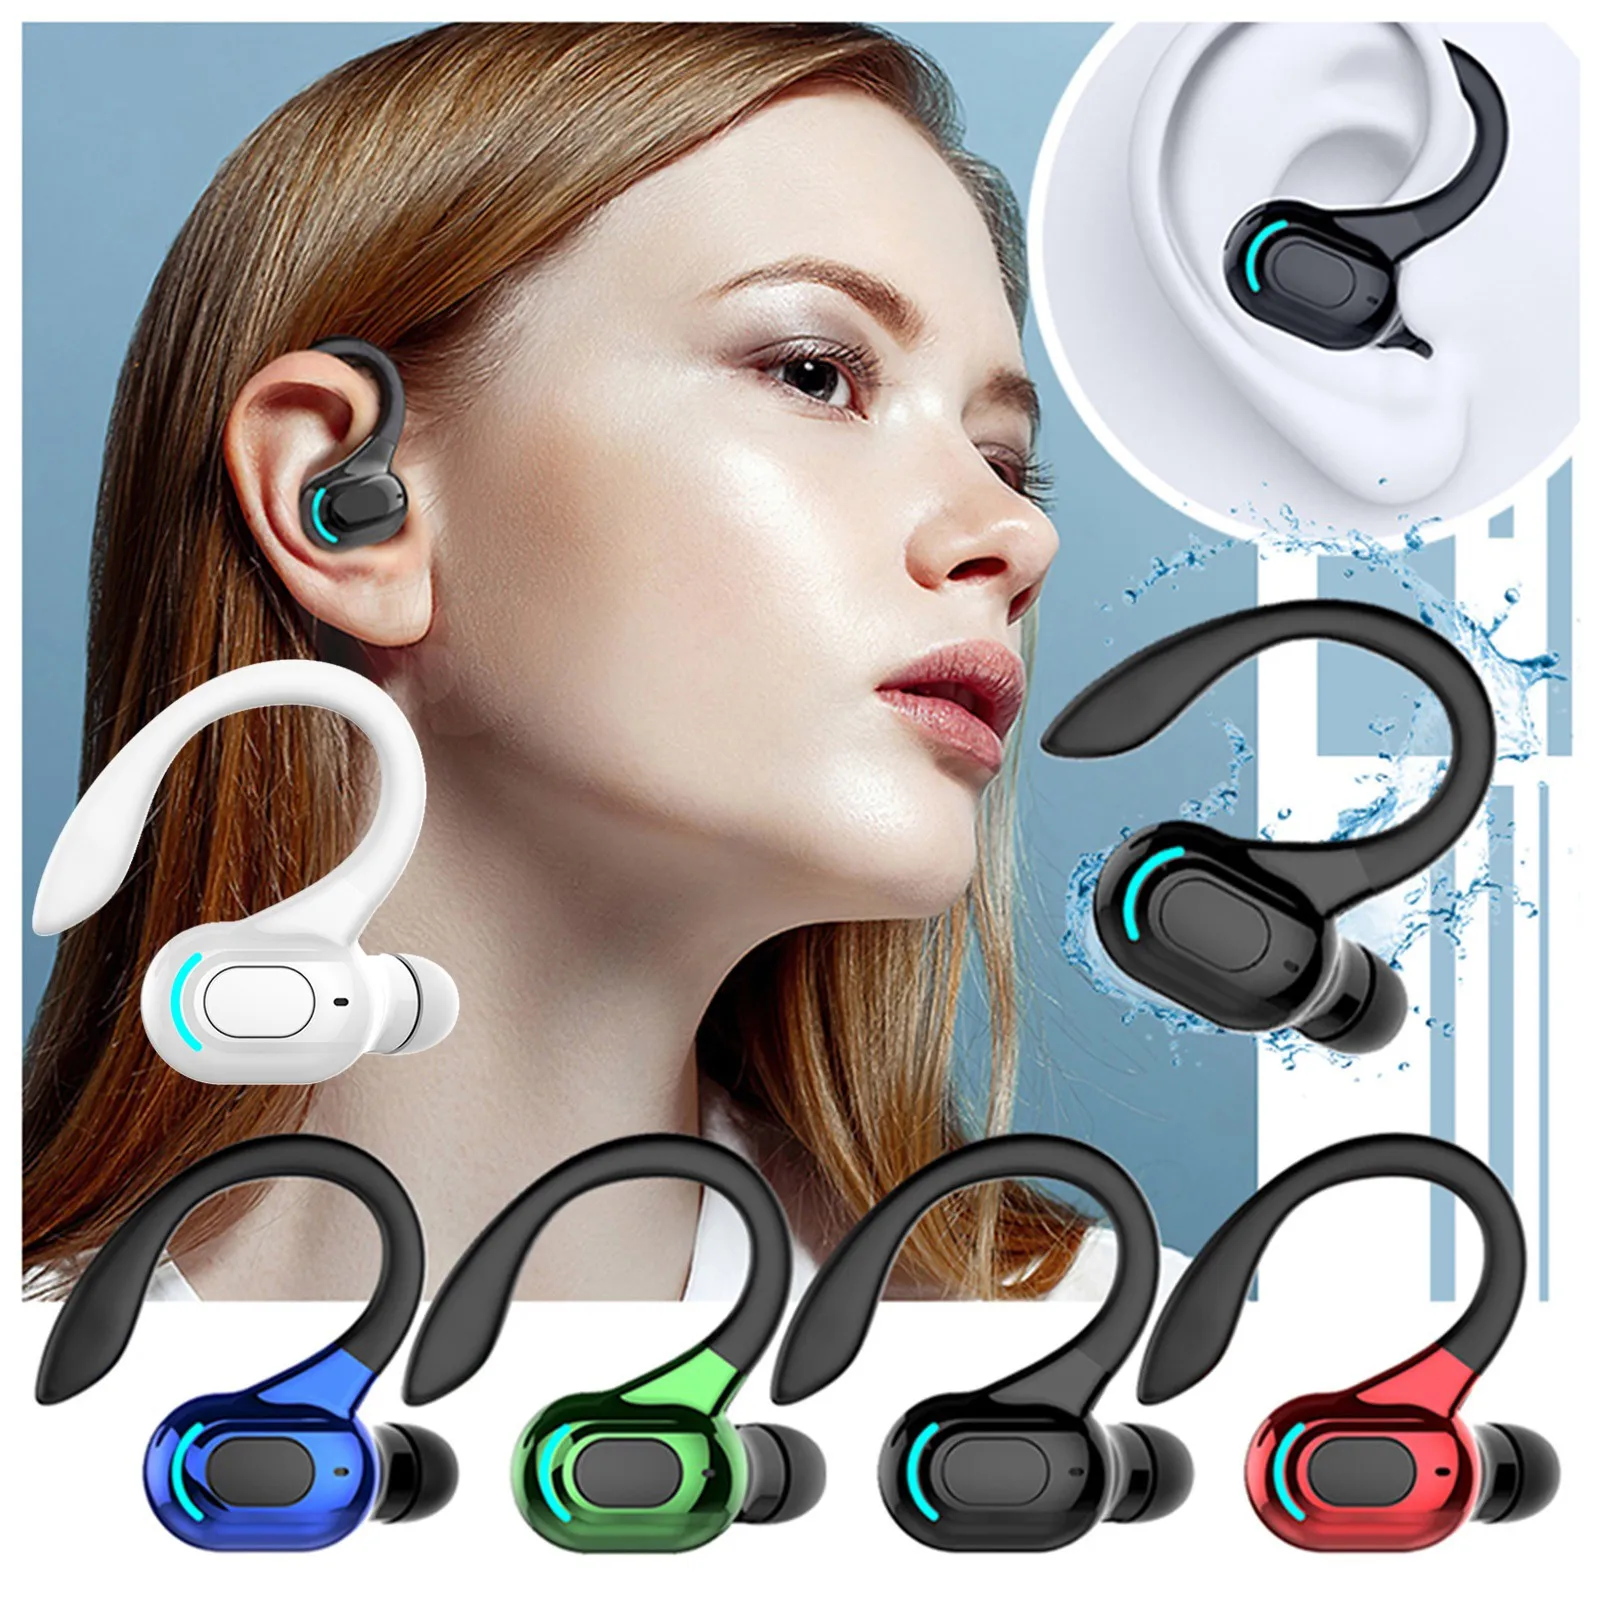 High-Fidelity Sound Quality Lossless Noise Reduction 300 Mah Rechargeable Battery Large Bluetooth Earbuds for Sports Wireless Bluetoothearbuds,Black Bluetooth Wireless Earbuds 5.0 